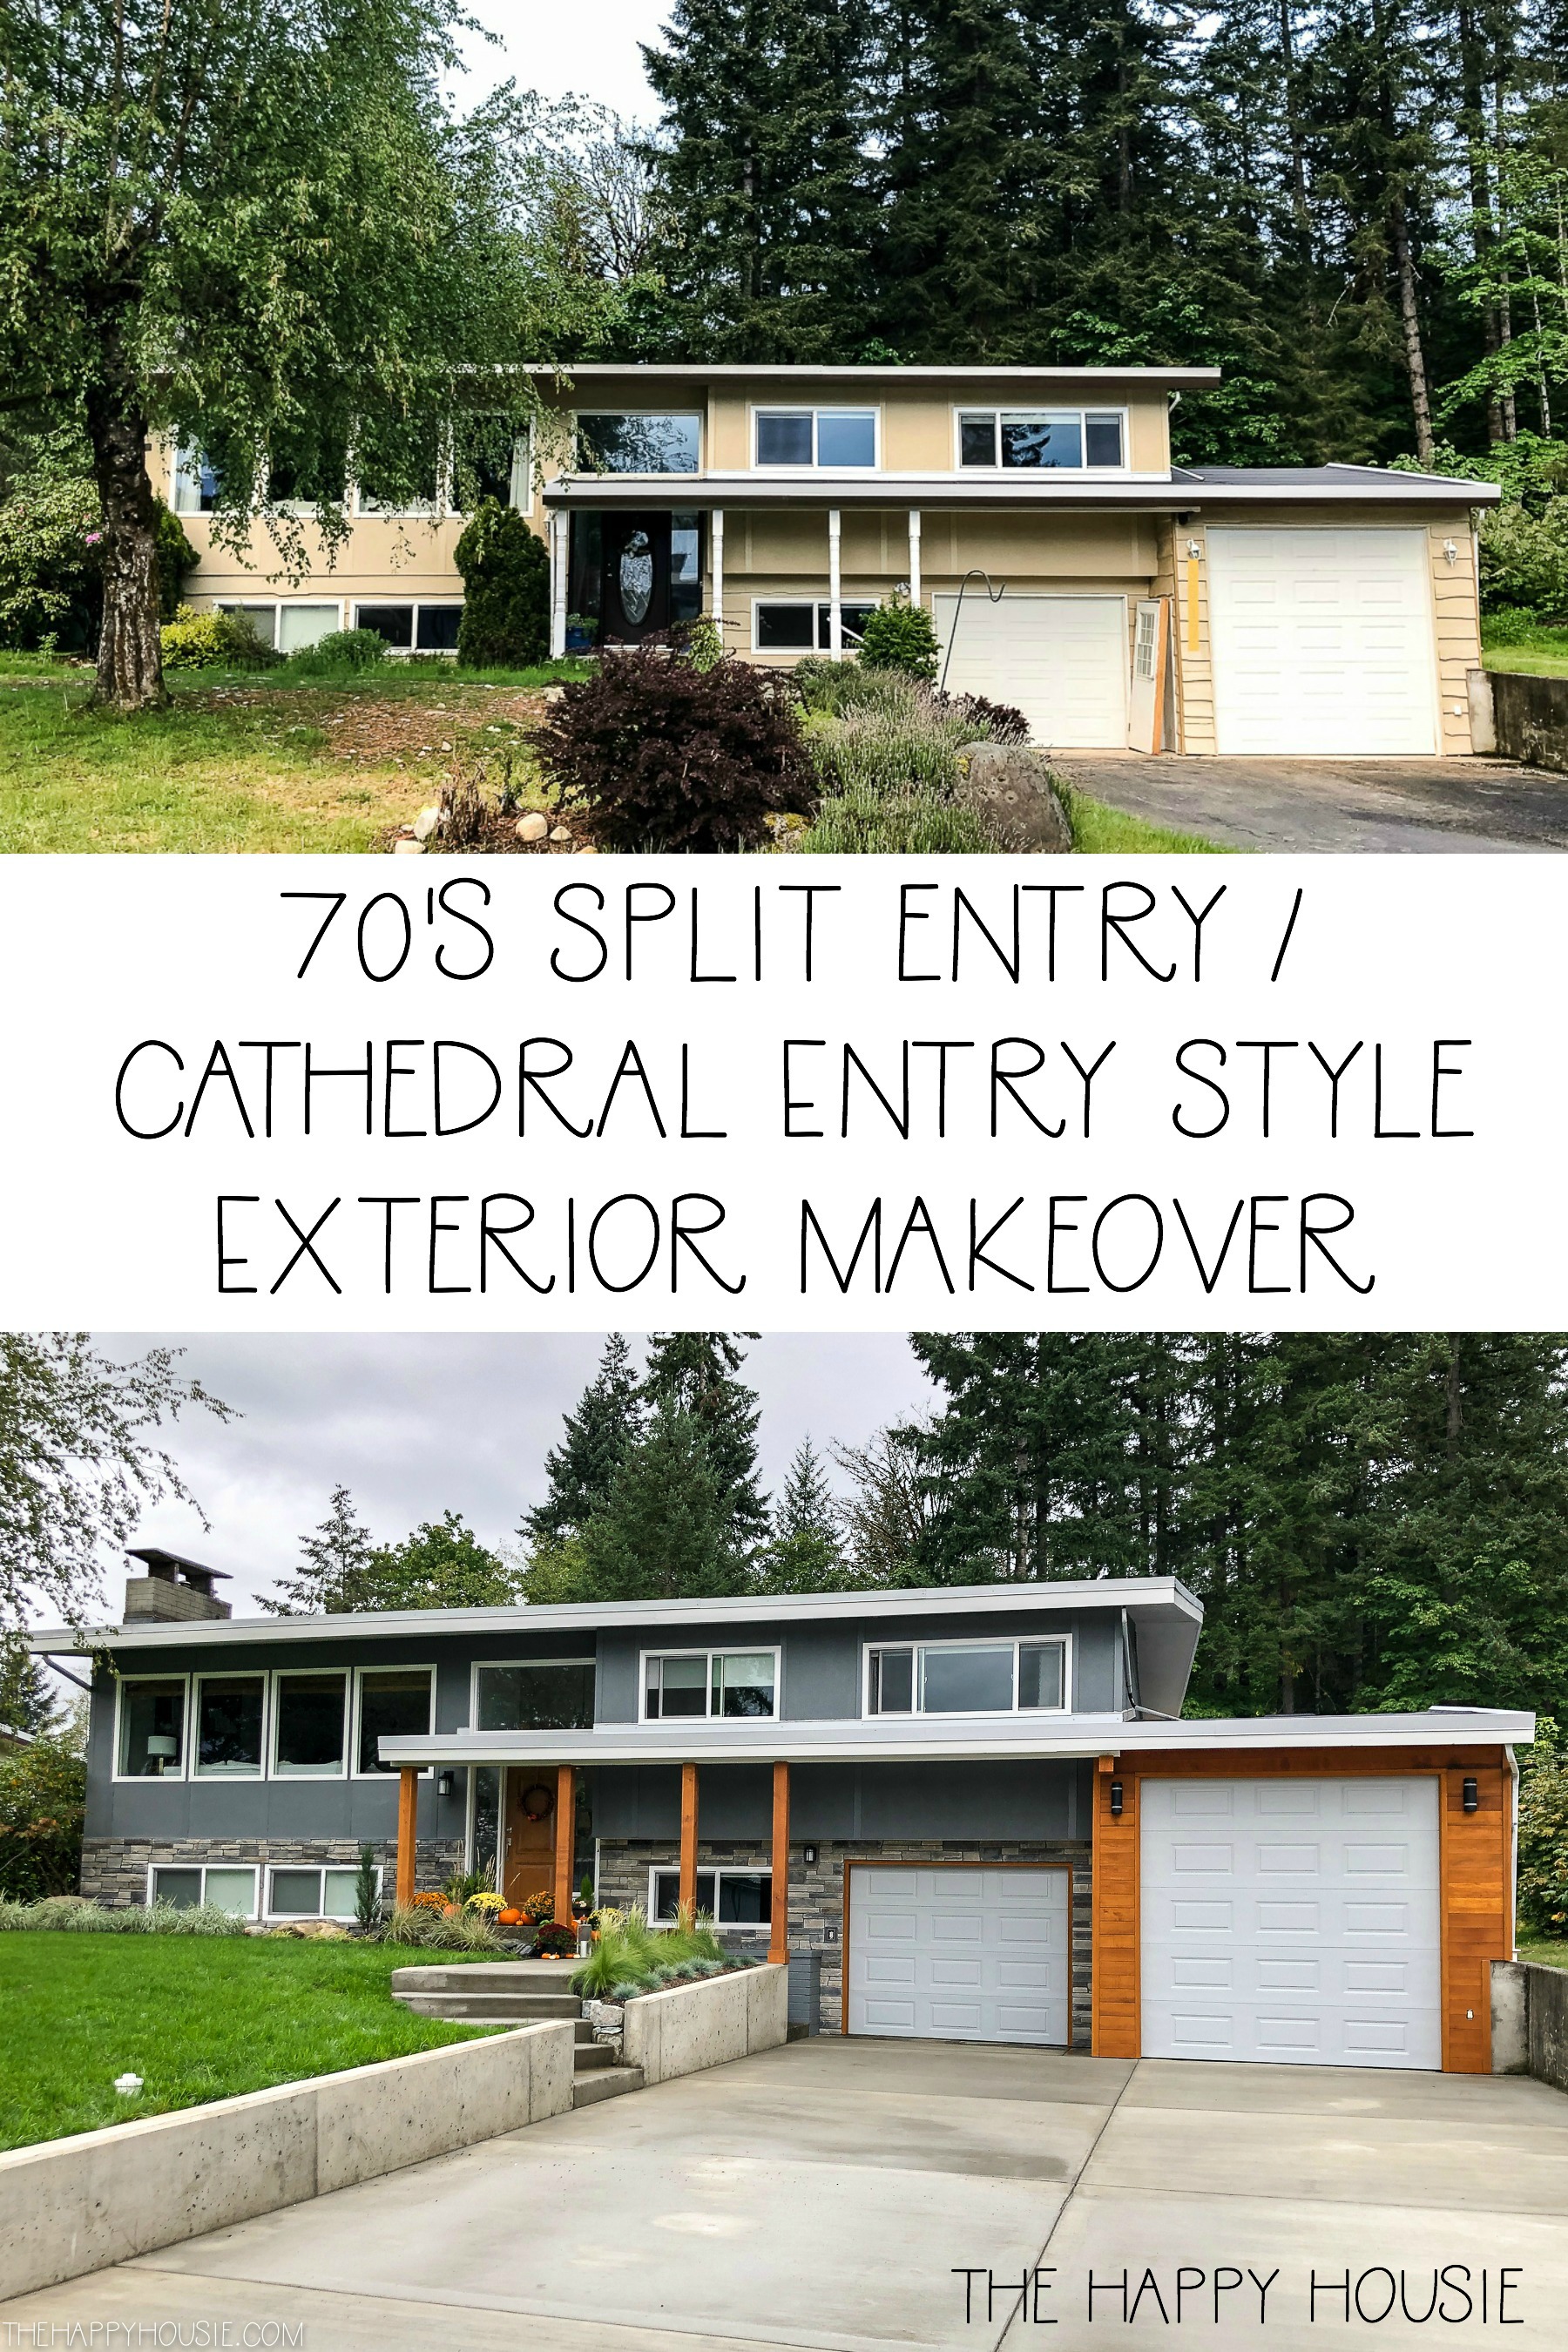 70's split entry cathedral entry style exterior makeover poster.